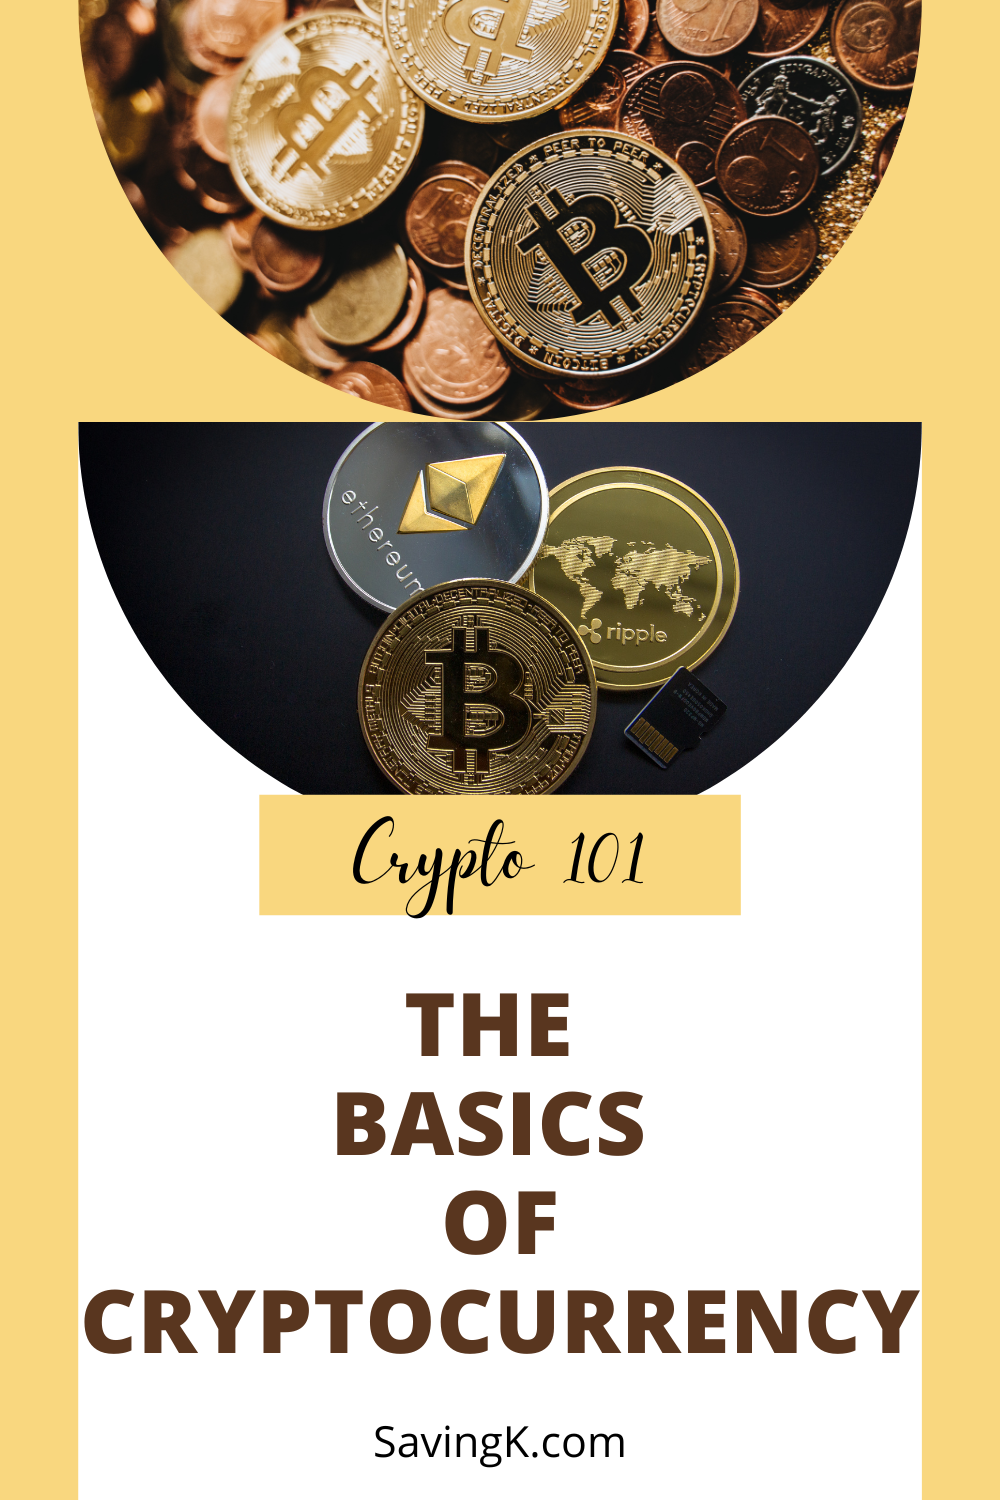 The Basics of Cryptocurrency